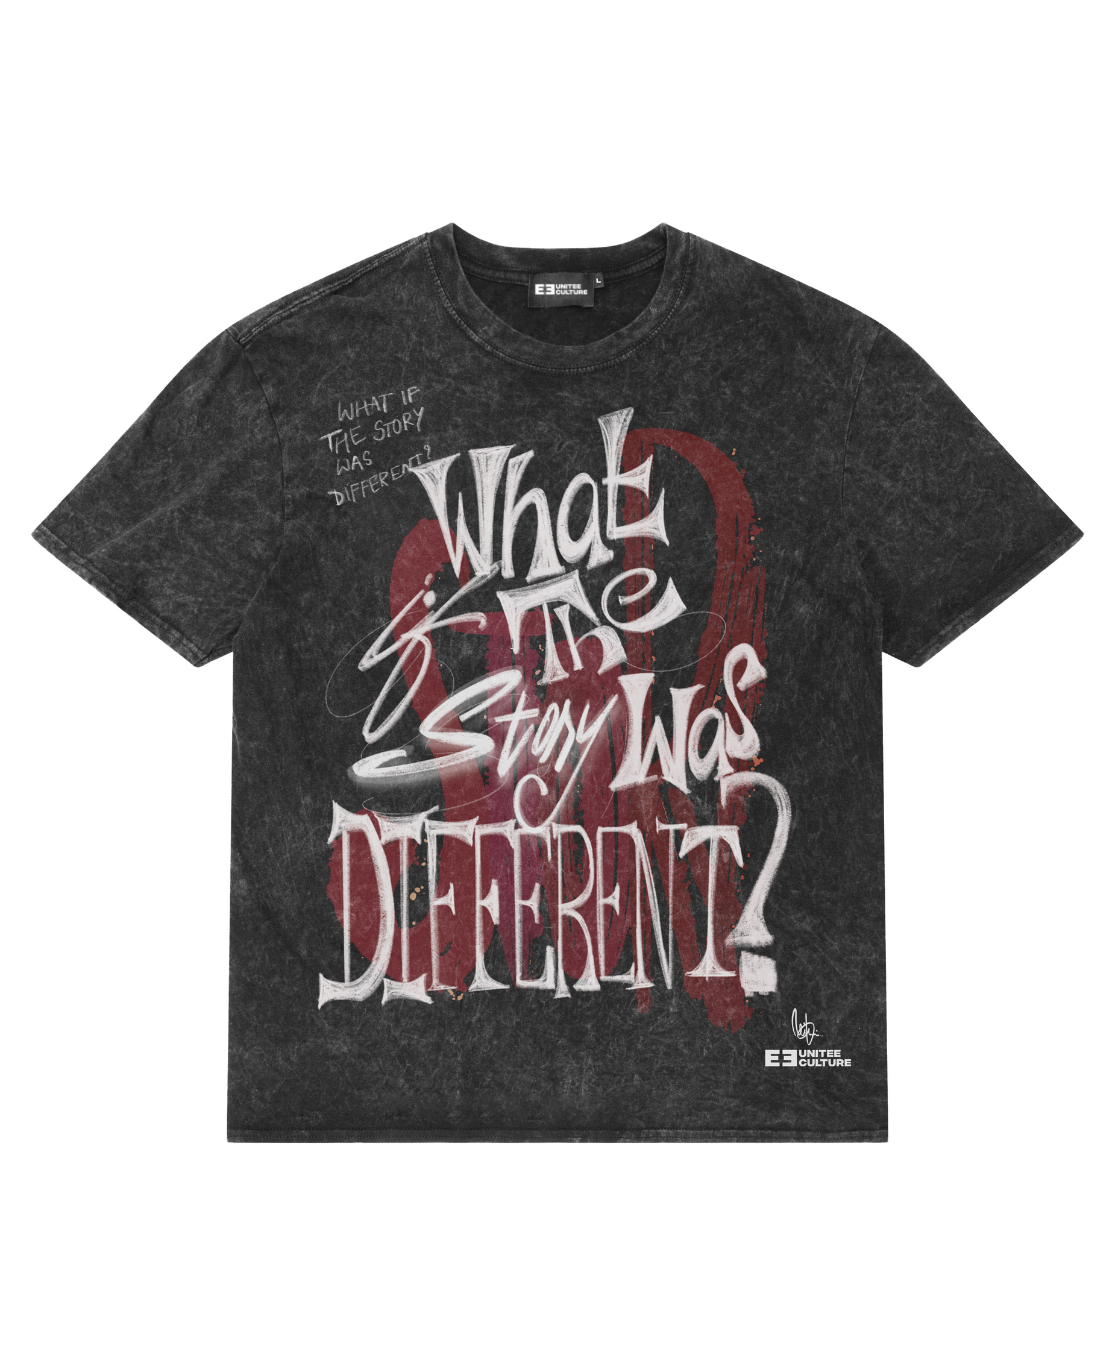 What if the story was different? (Acid wash)